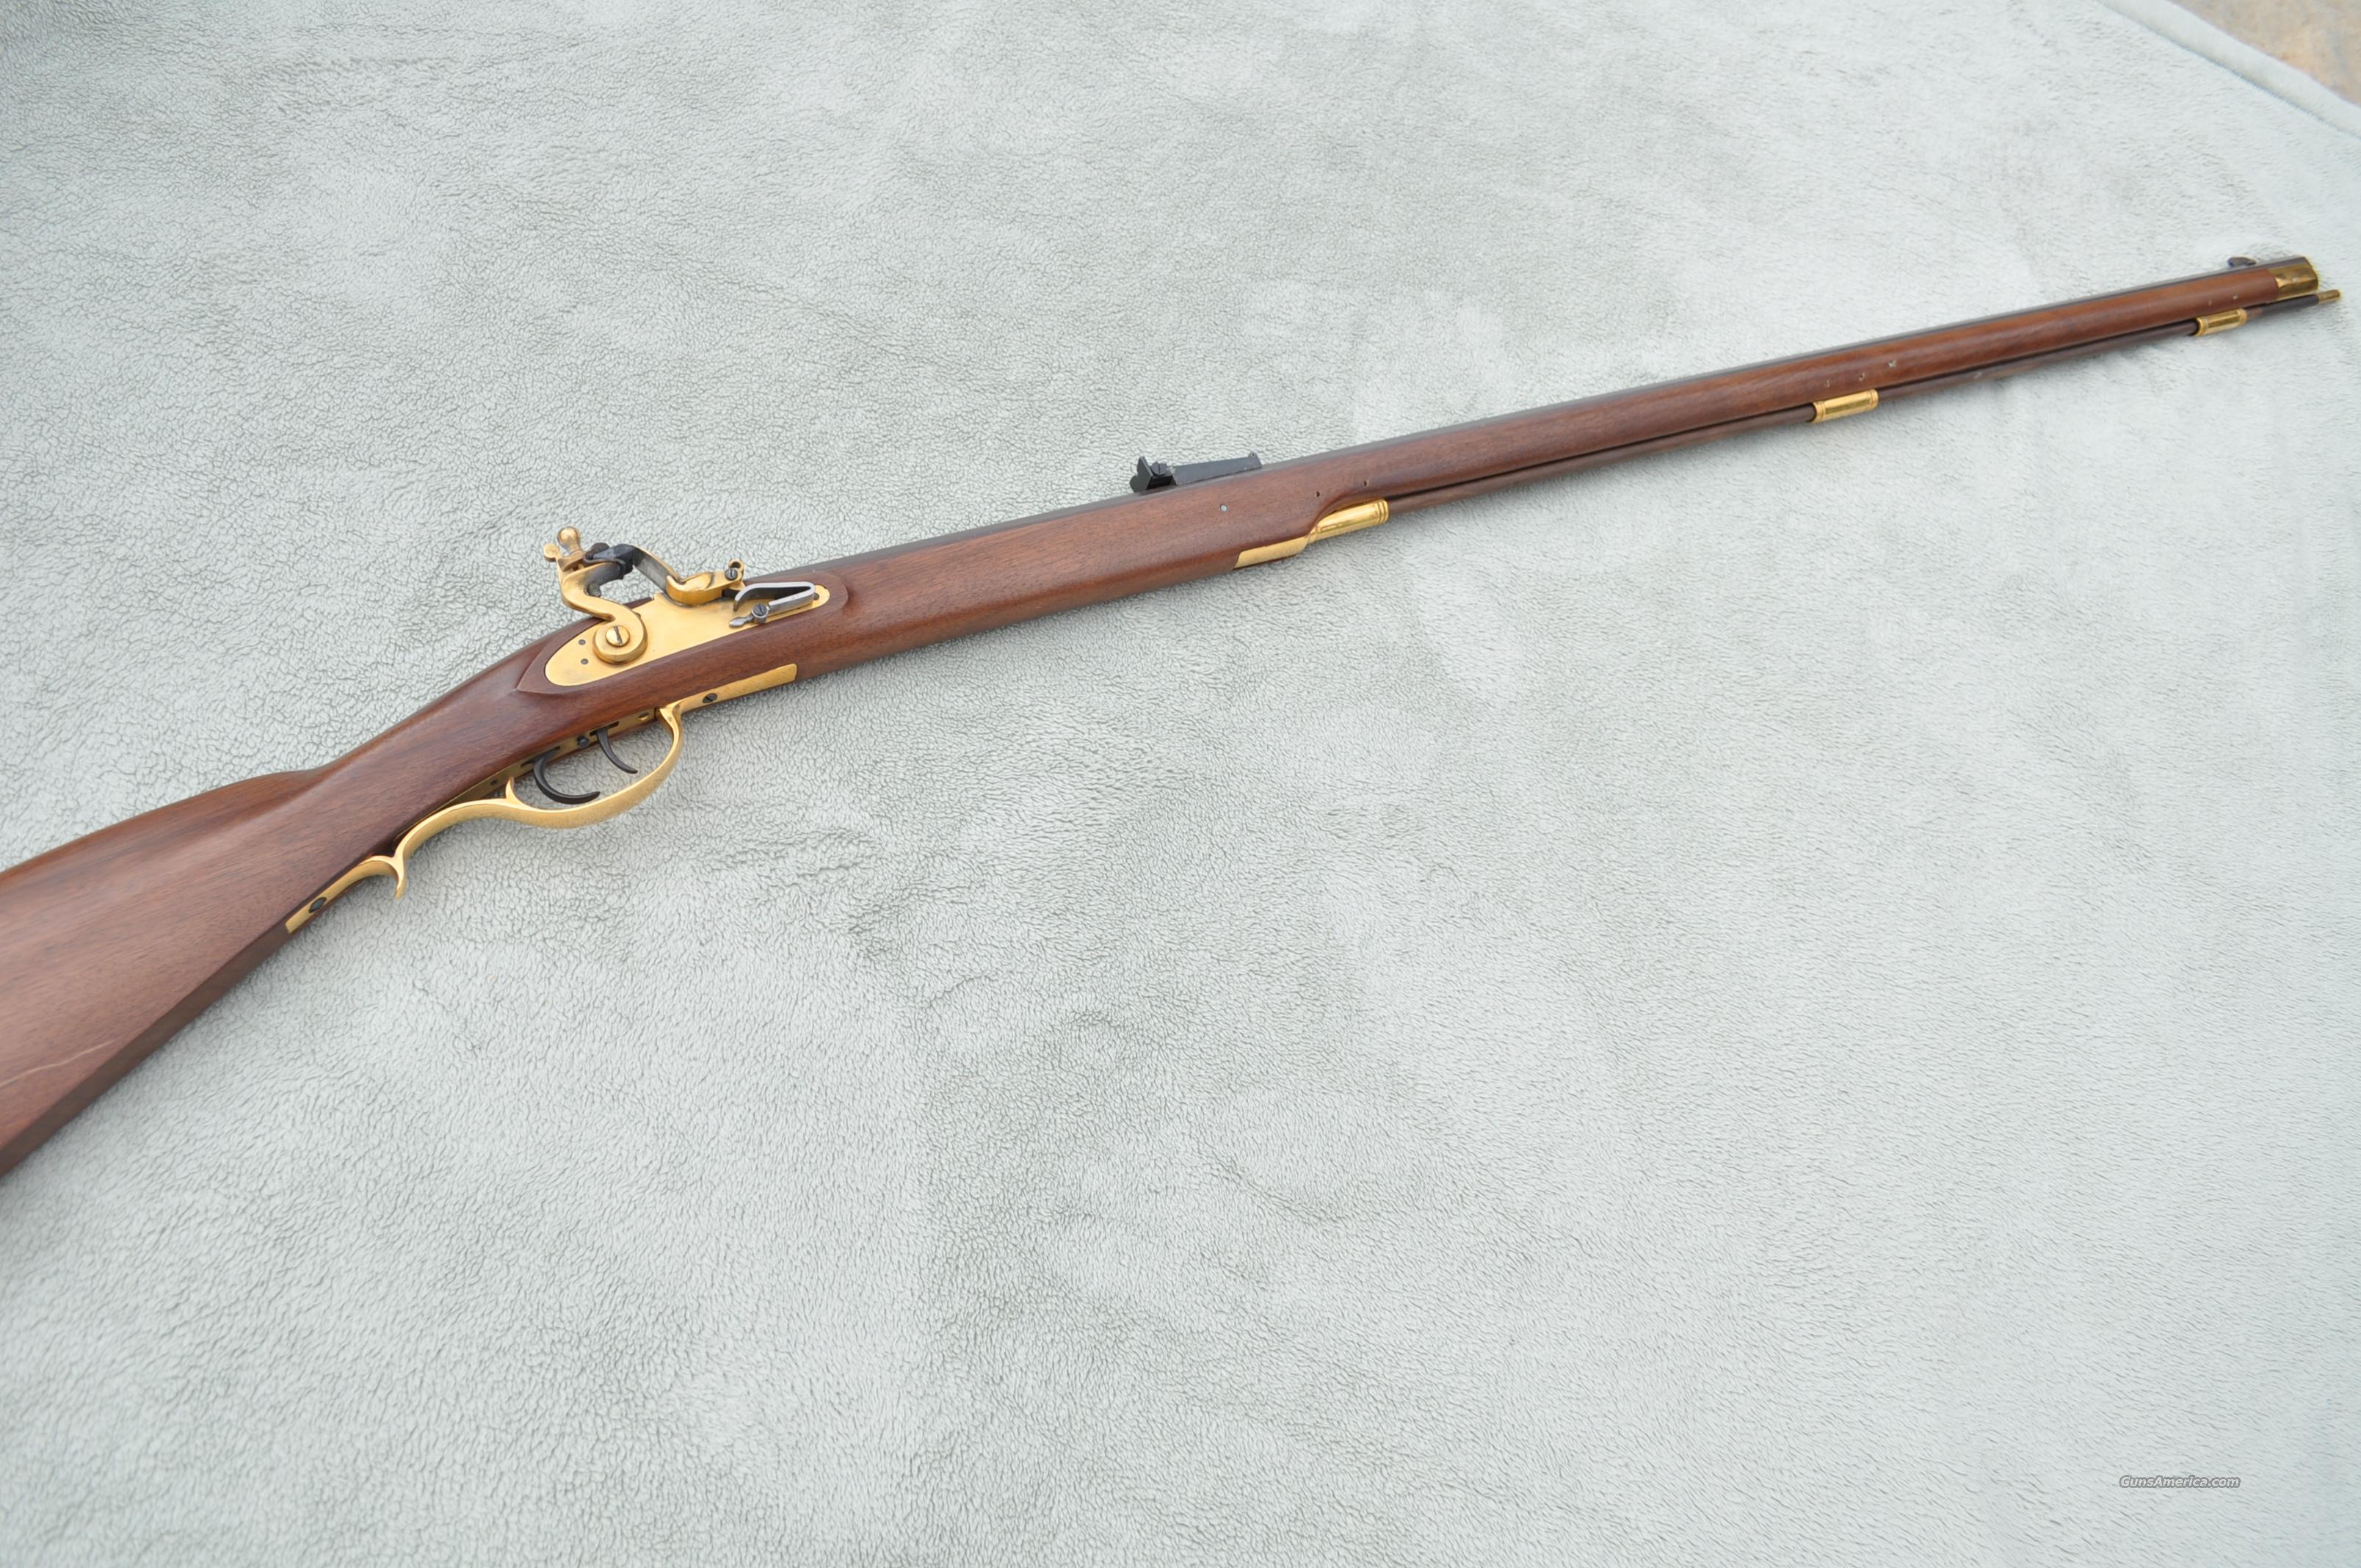 lyman great plains rifle serial numbers